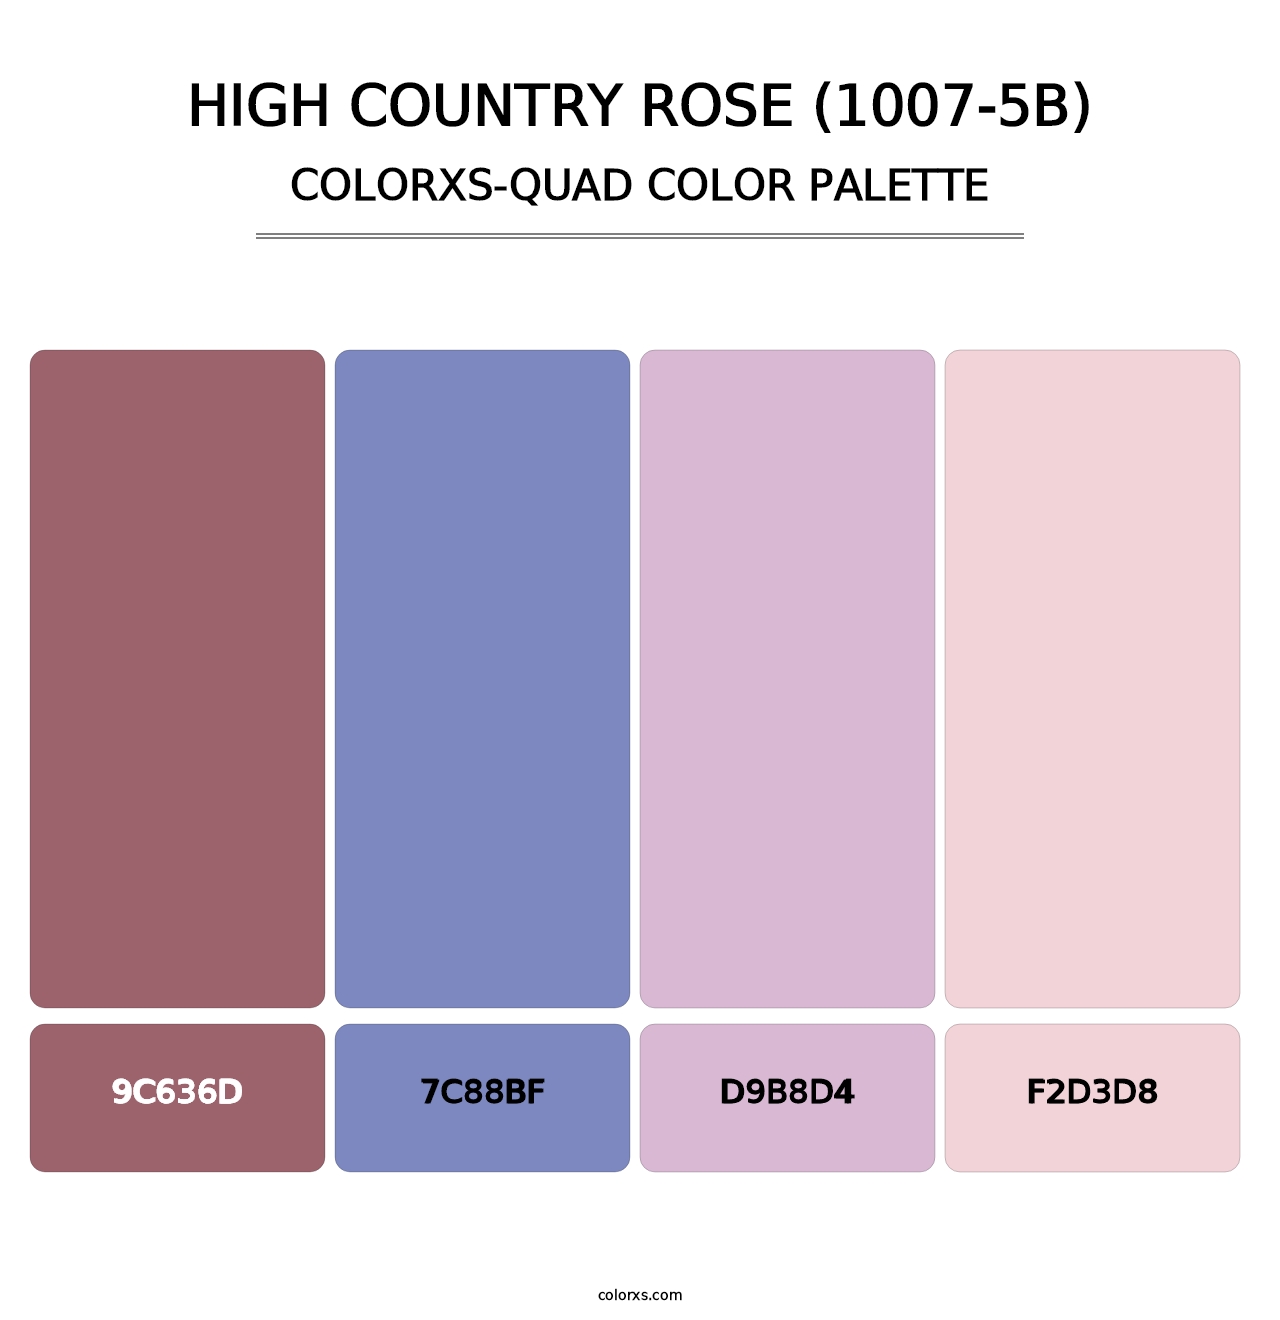 High Country Rose (1007-5B) - Colorxs Quad Palette